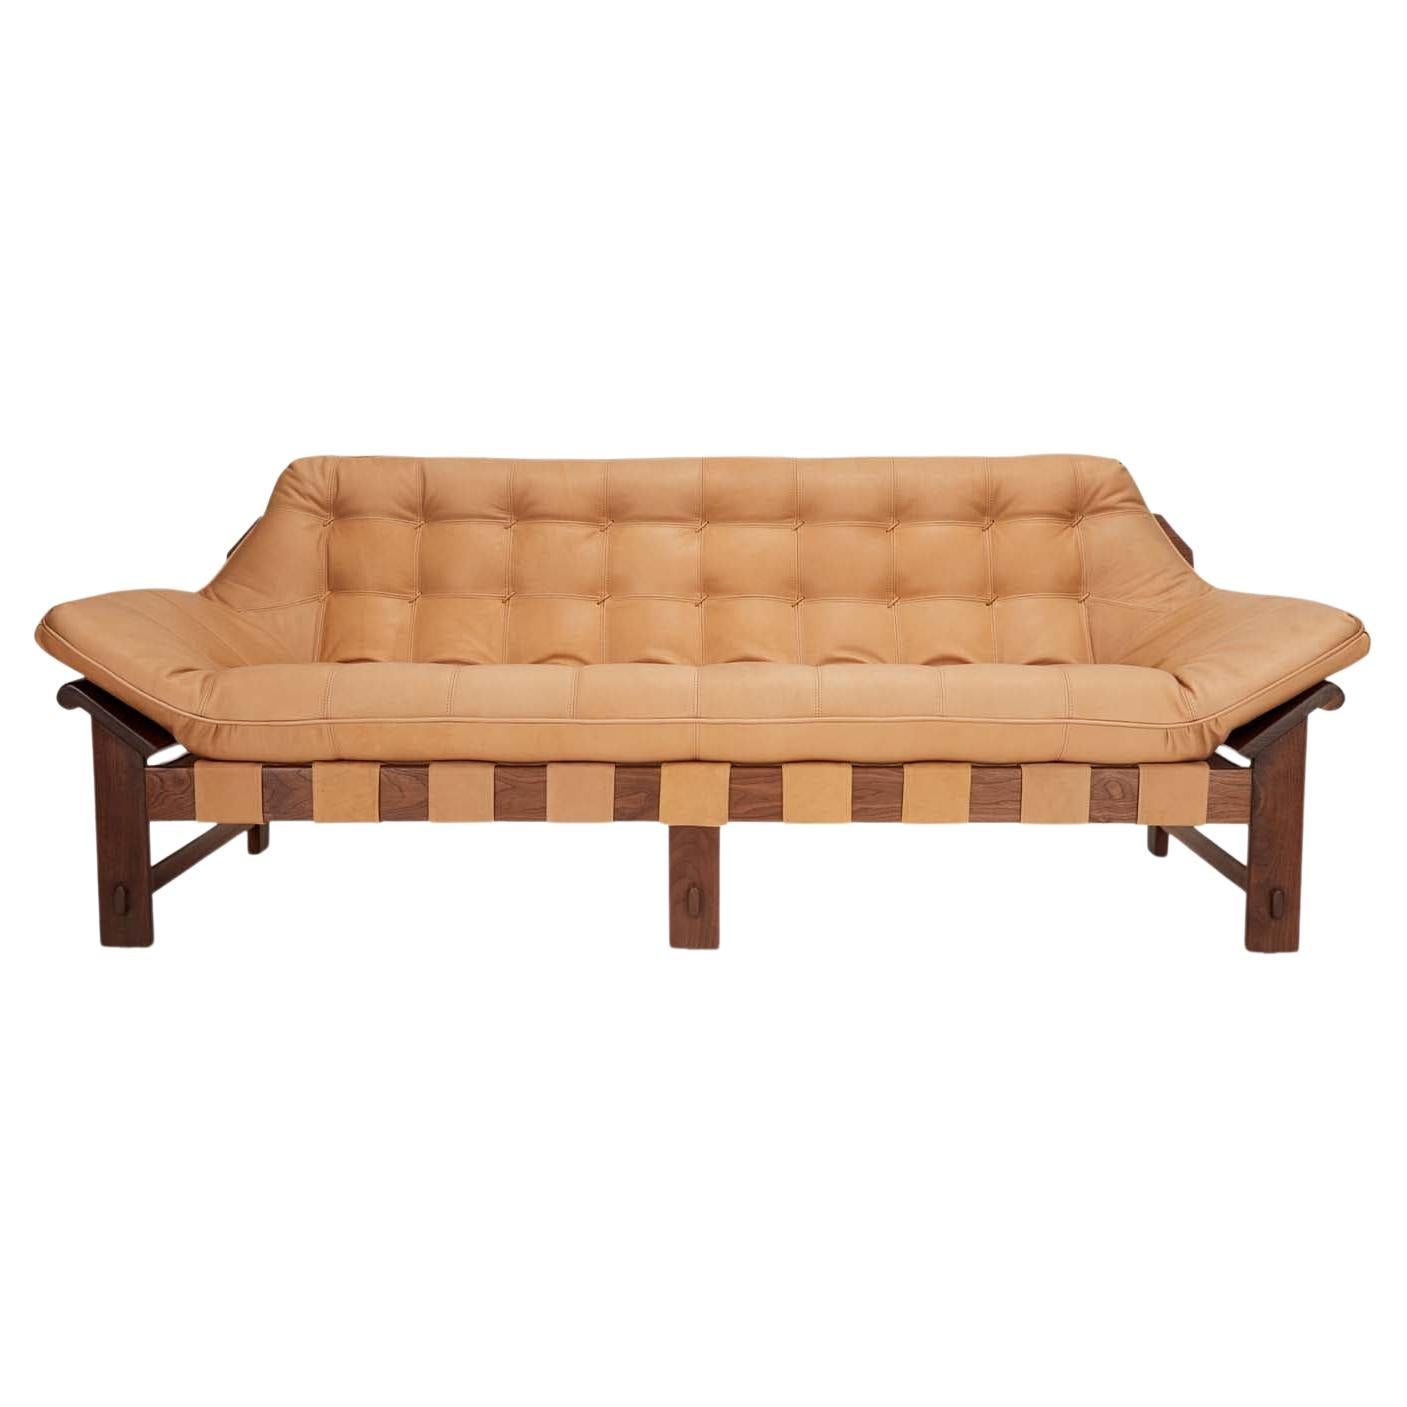 The Ojai sofa features a solid white oak or solid walnut base and a single tufted leather cushion with leather straps. Shown here in deer tan leather and oiled walnut. 

The Lawson-Fenning Collection is designed and handmade in Los Angeles,